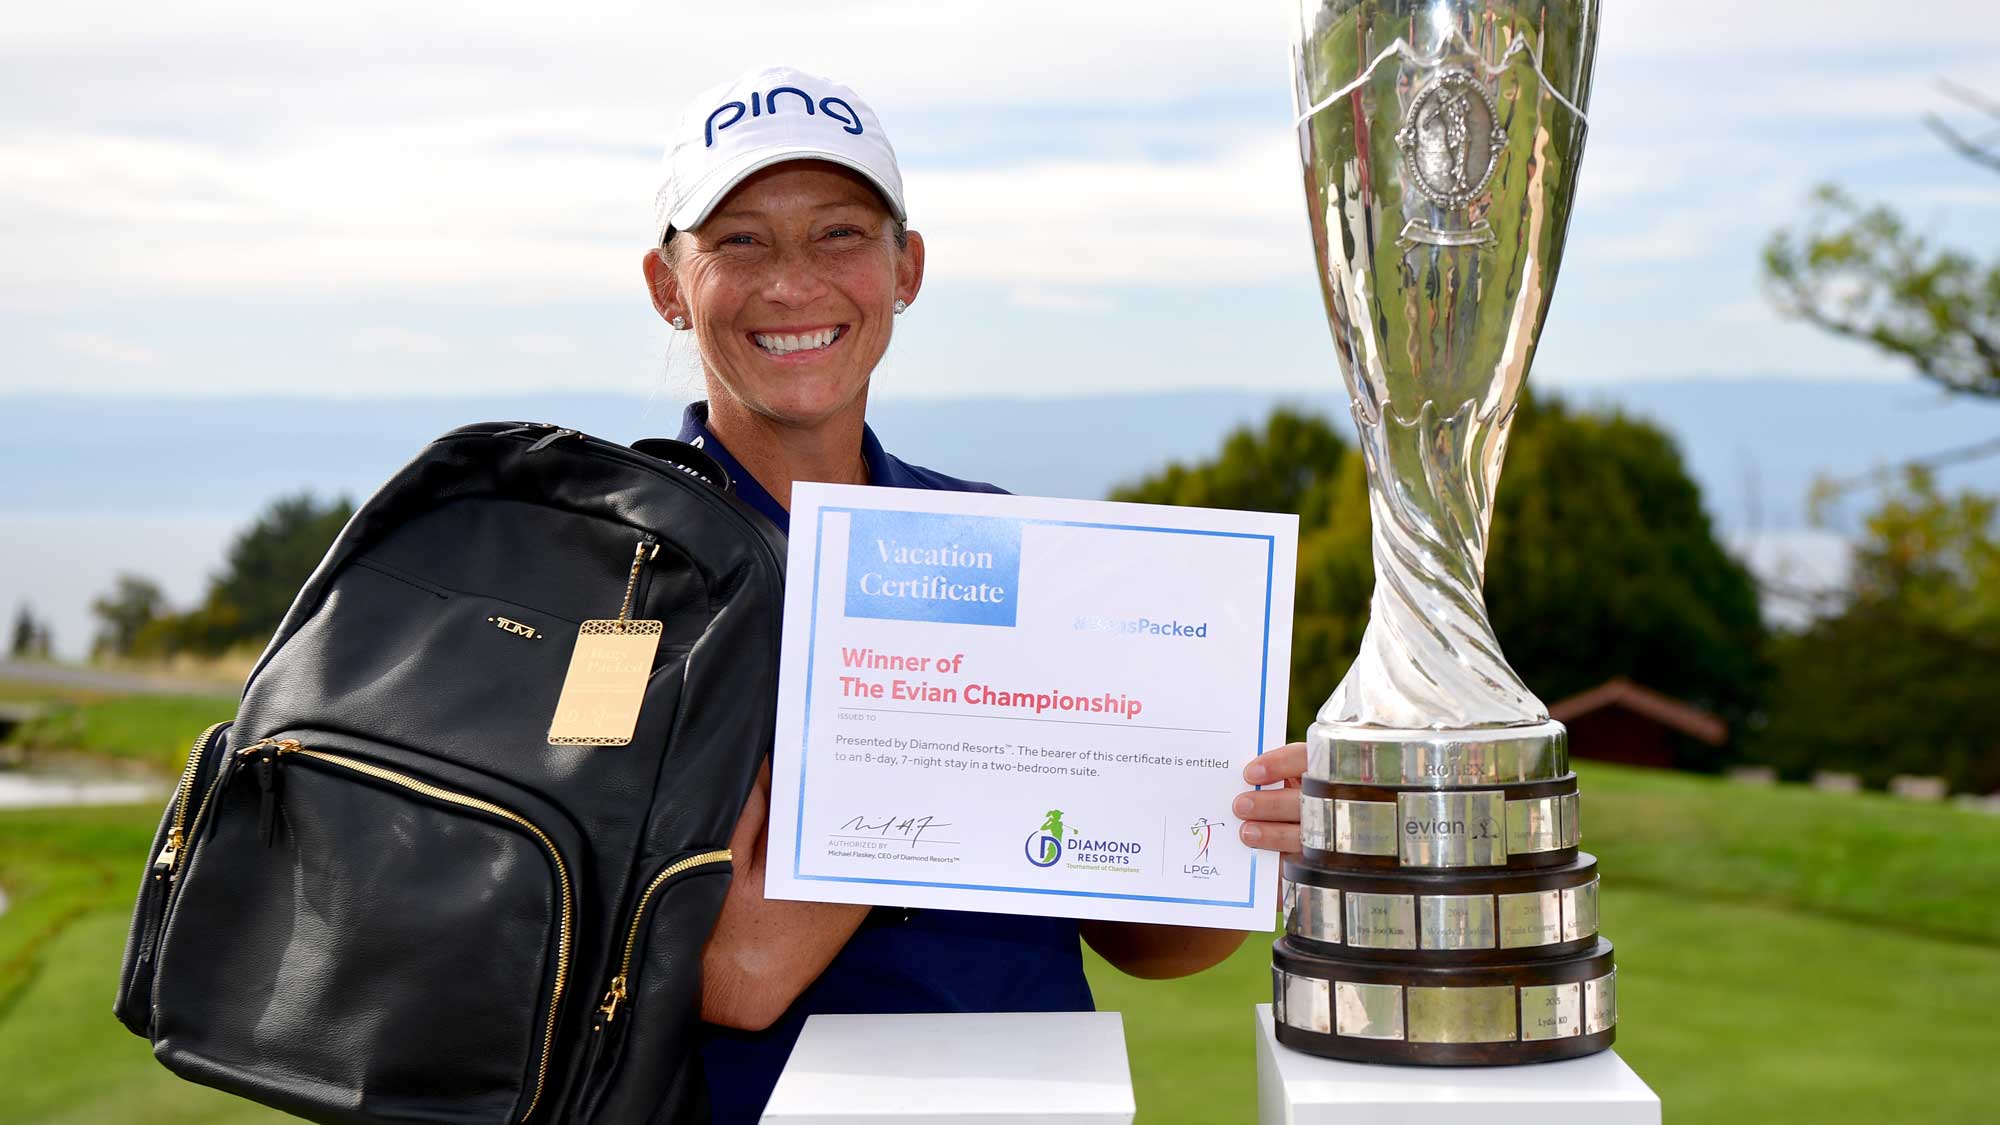 Angela Stanford has her #BagsPacked for the 2019 Diamond Resorts Tournament of Champions after her first career major victory at the 2018 Evian Championship